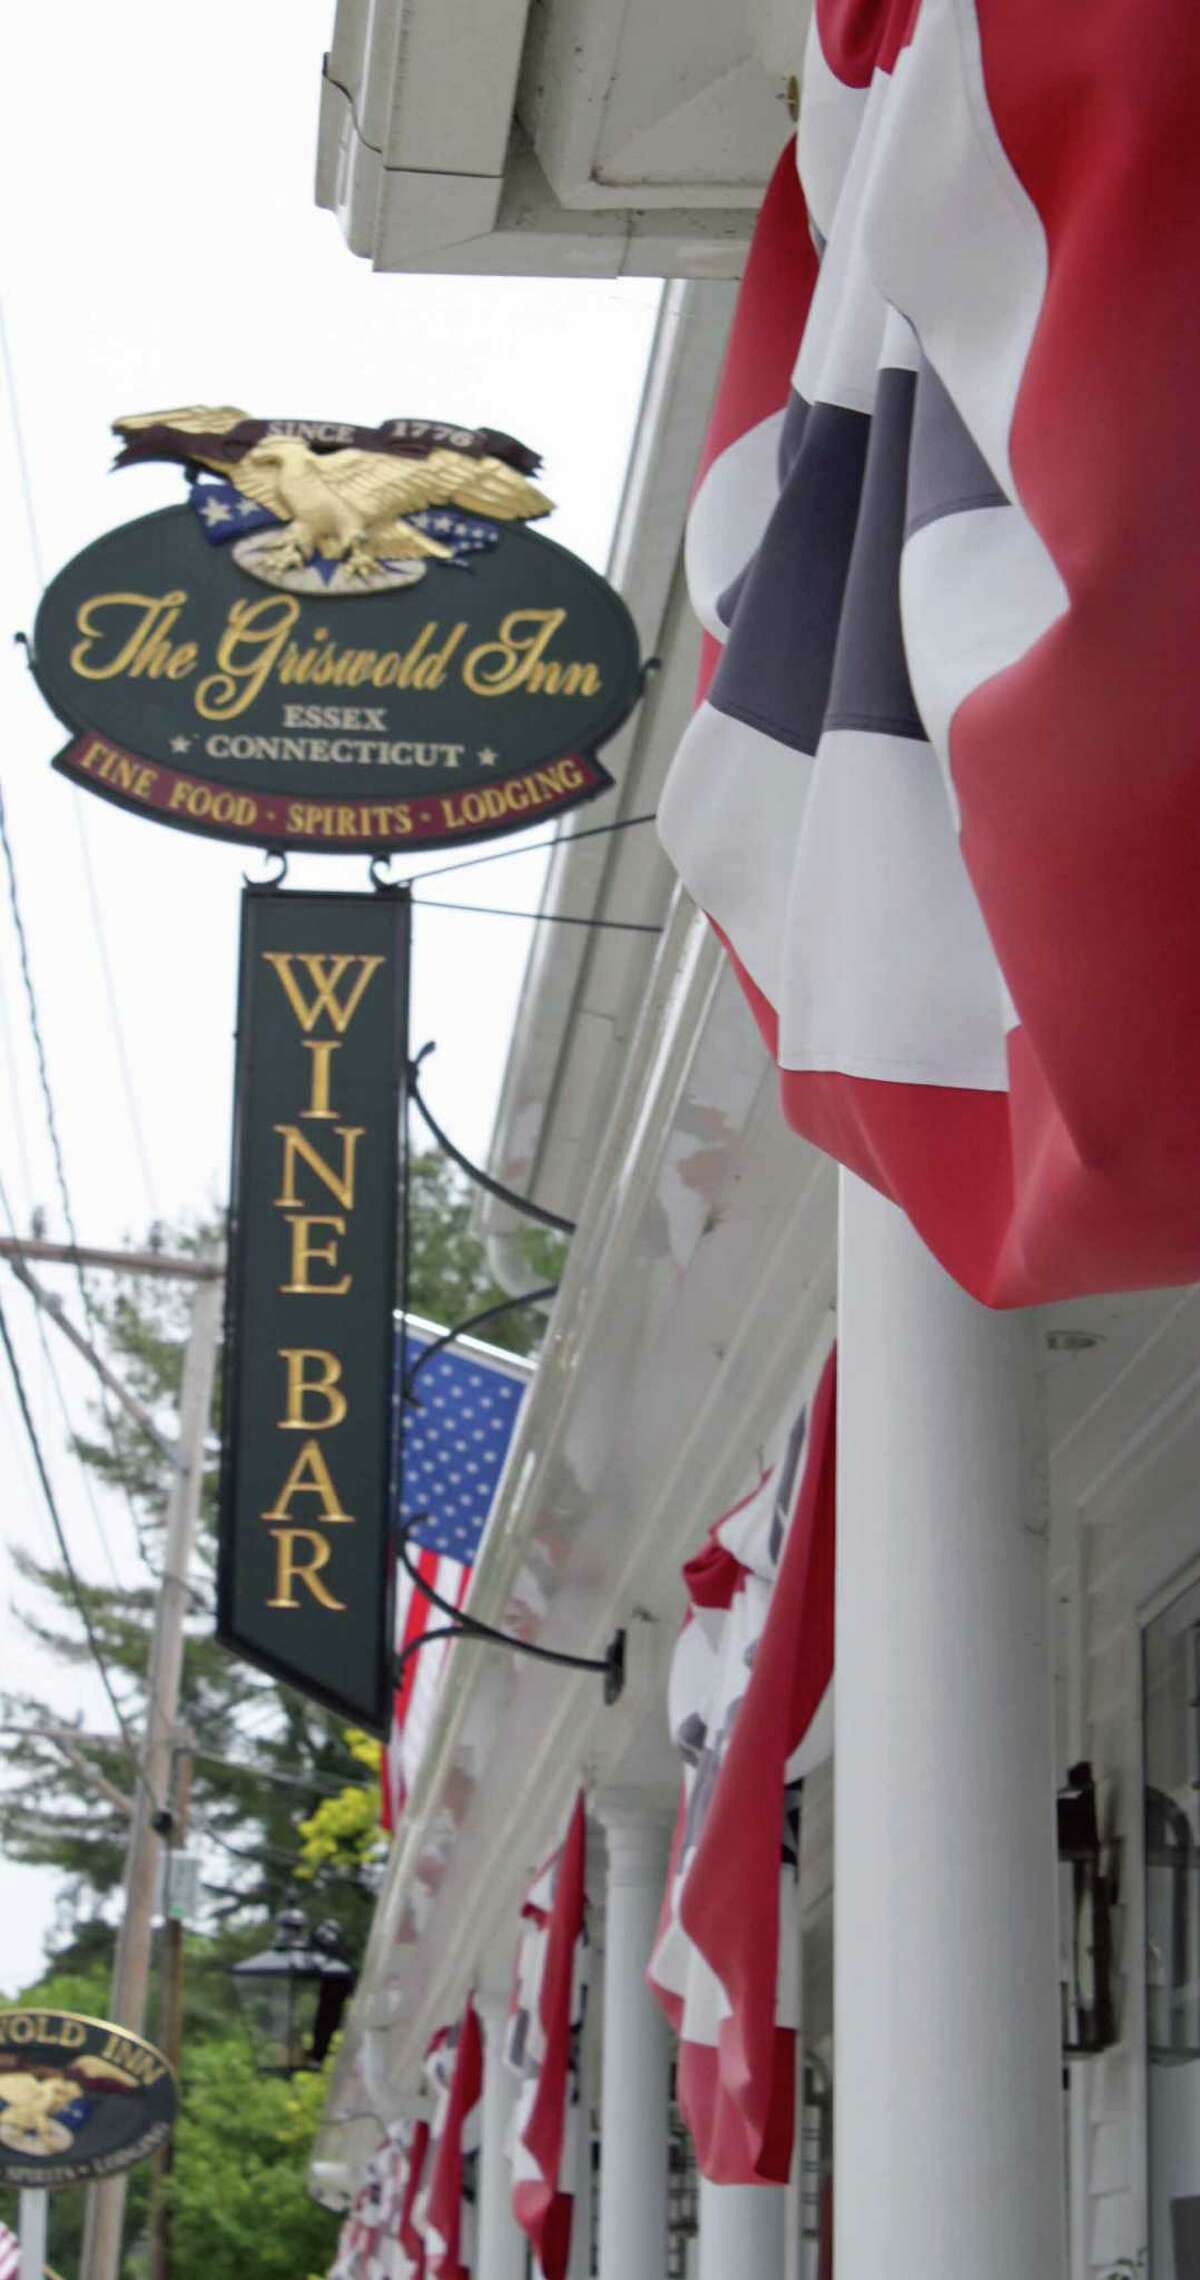 The Griswold Inn in Essex